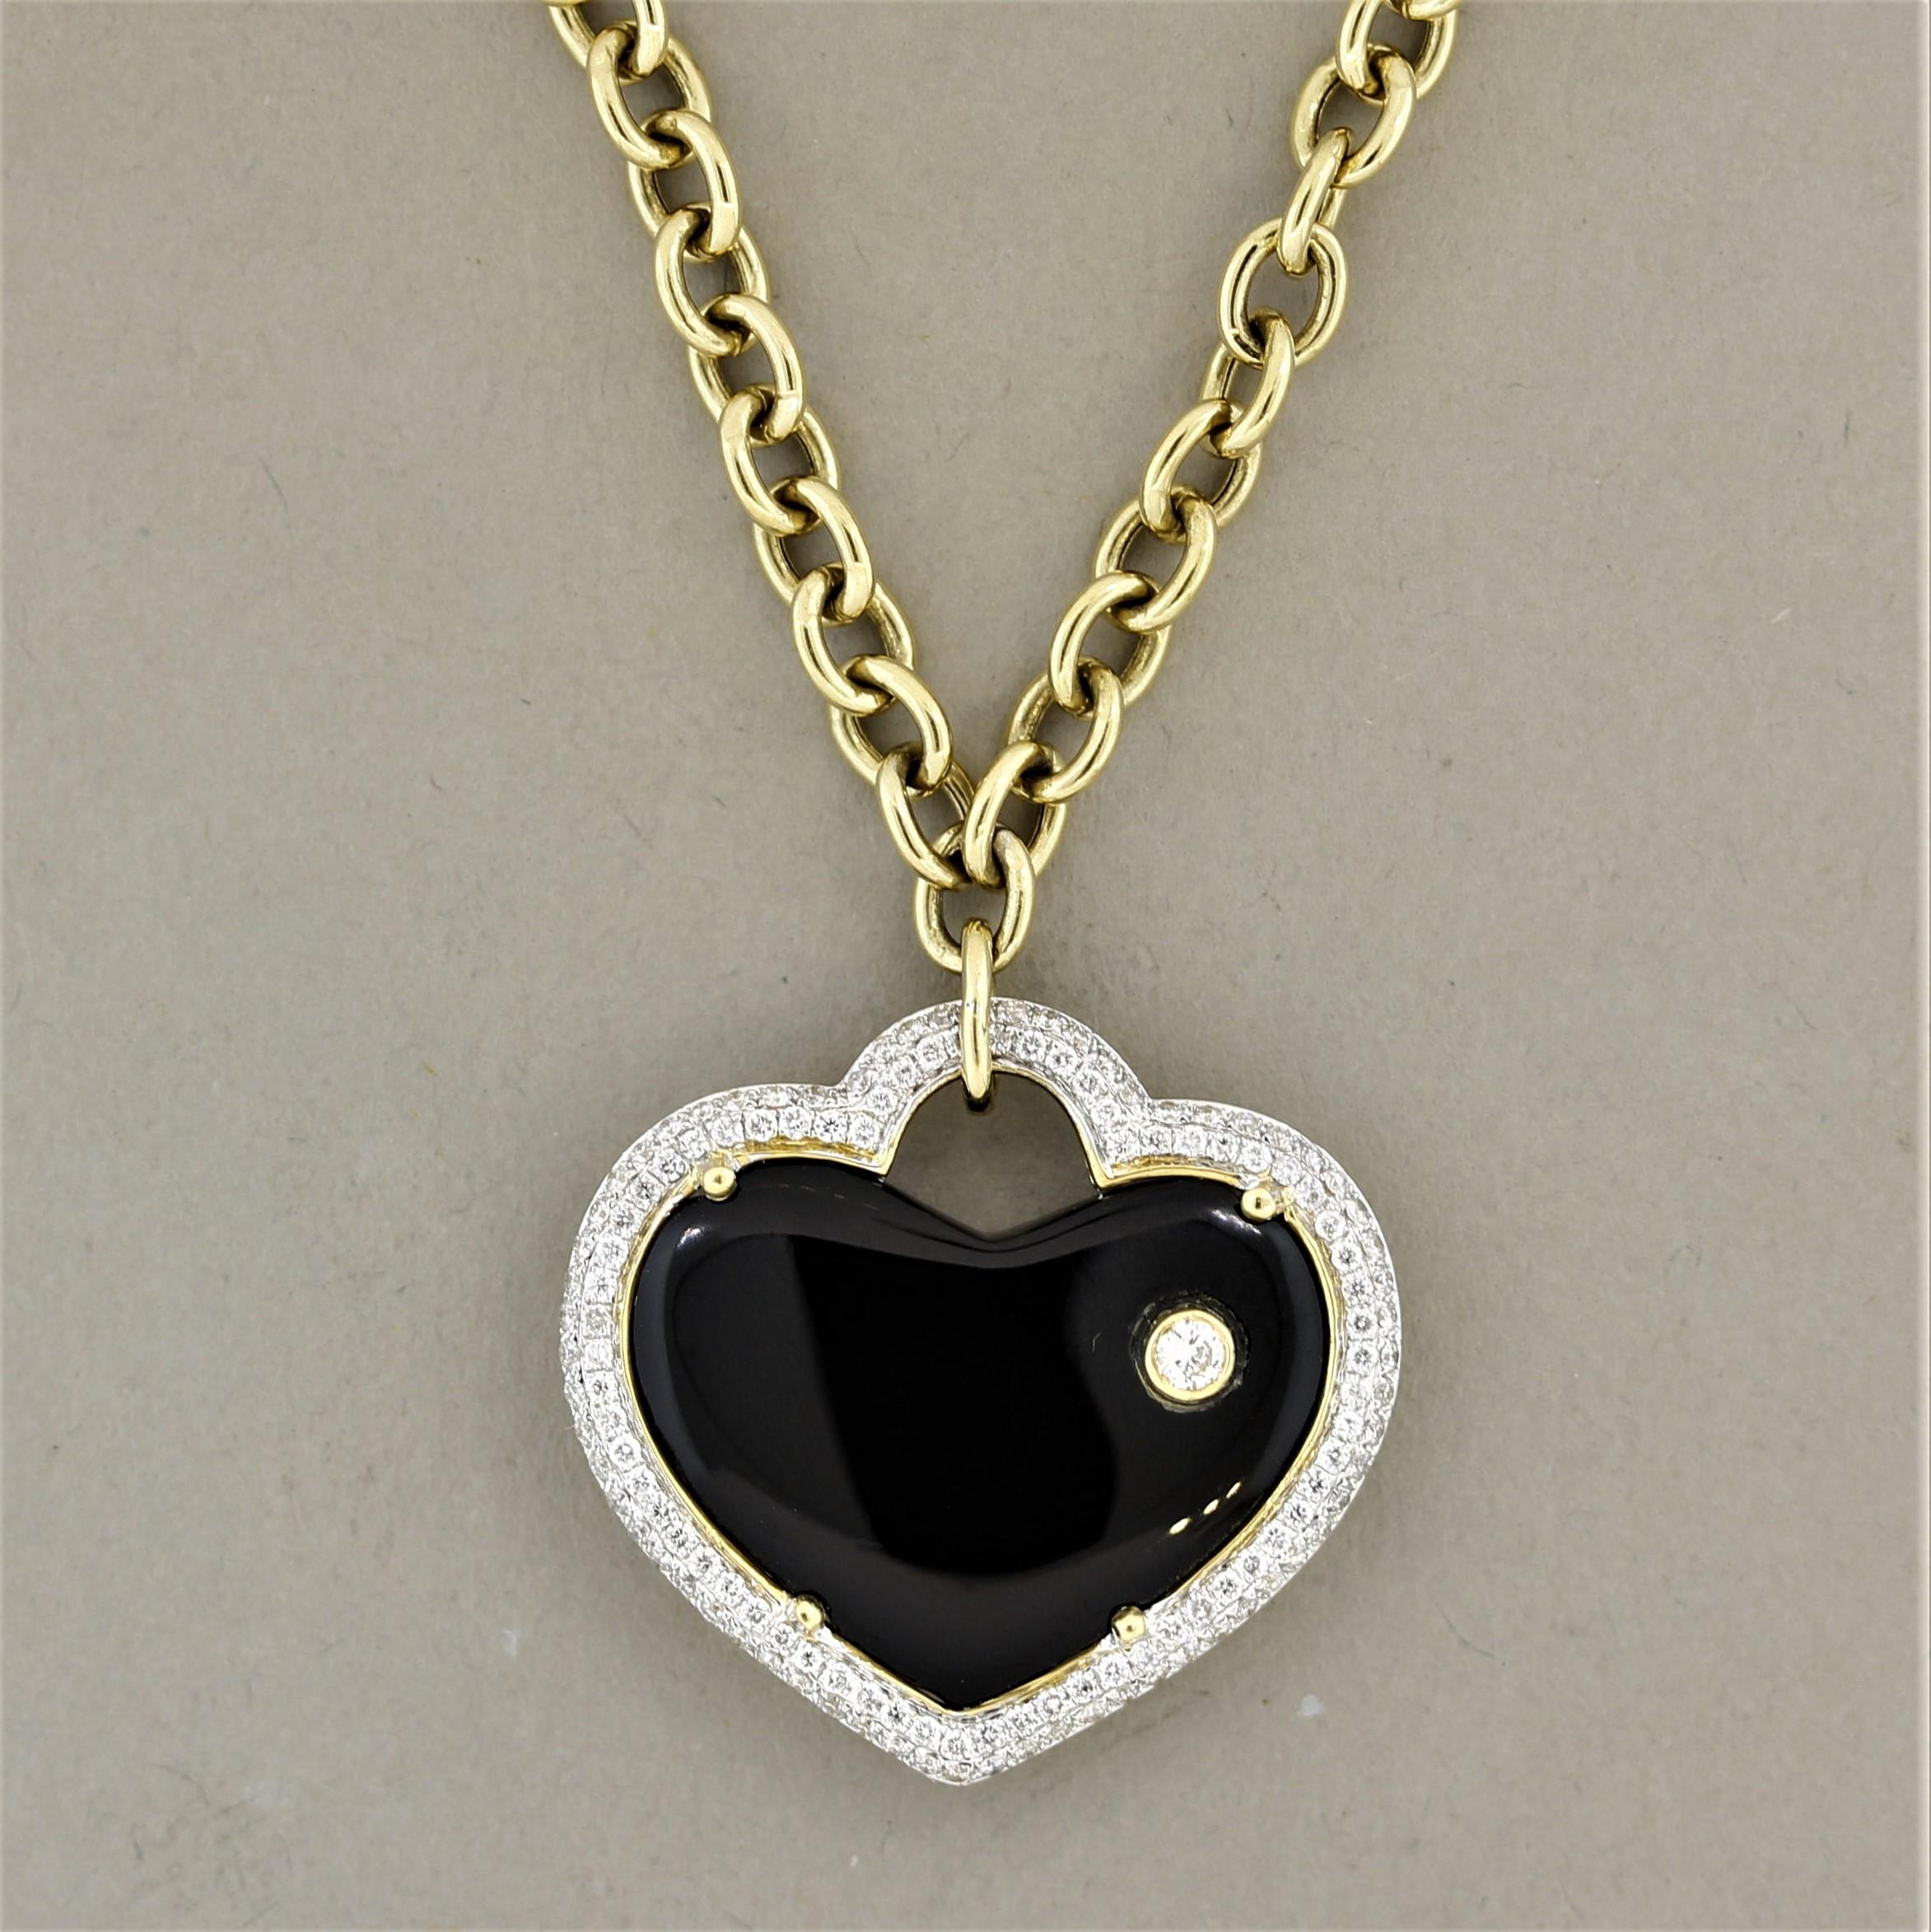 A cute and stylish necklace made in 18k gold! It features a 11.22 carat piece of black onyx which has been polished and shaped into a smooth heart shape. It is haloed by round brilliant cut diamonds as well as studded with a single larger diamond